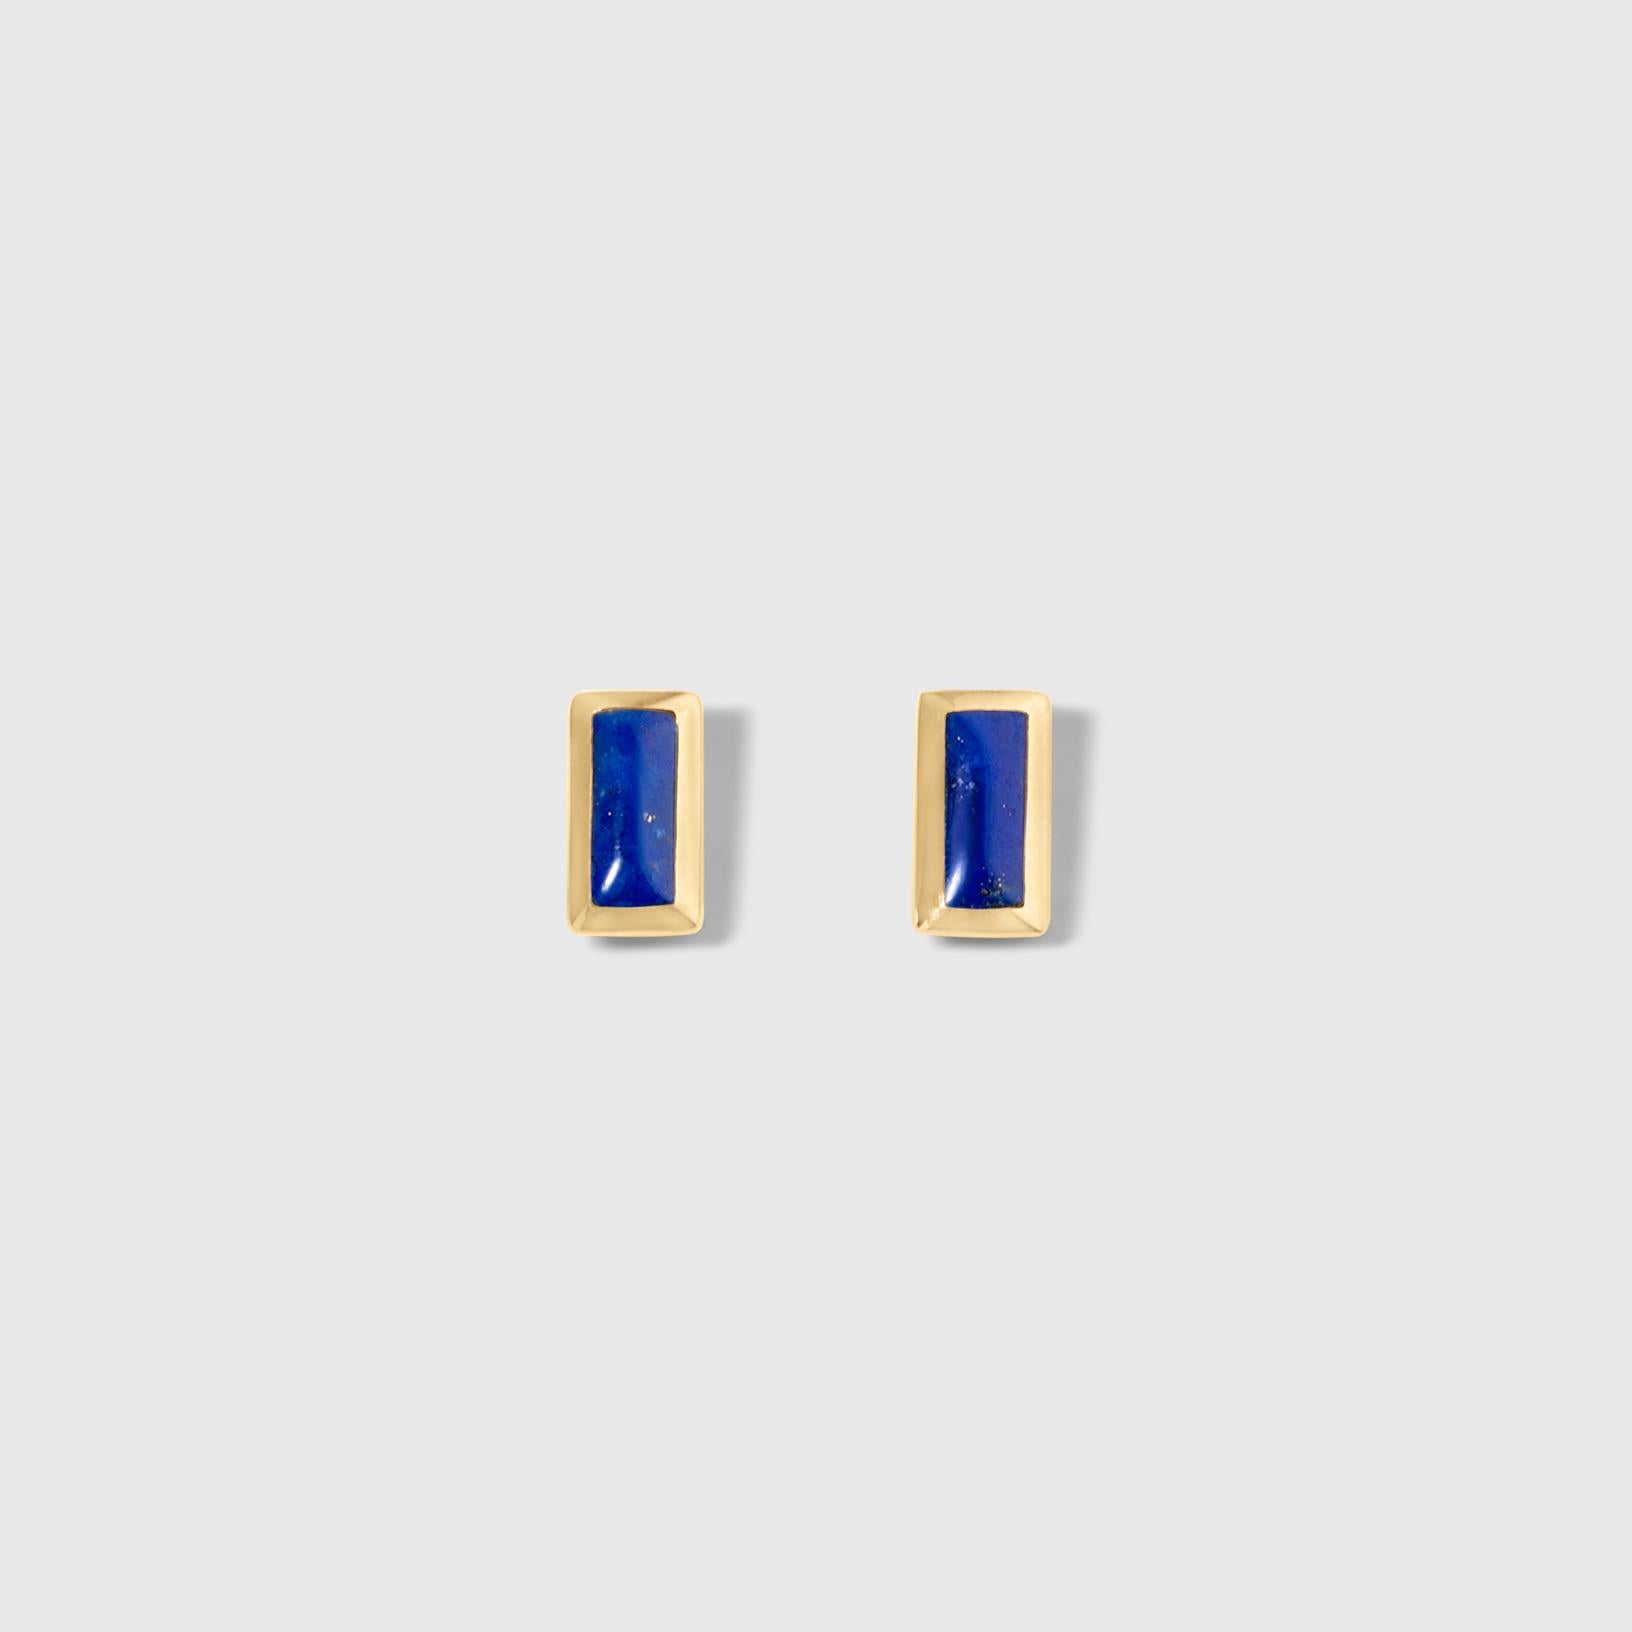 Little, Rectangular, Lapis Inlay Post Earrings, 14kt Gold, Very small post earrings
All designs may be custom-ordered in many of Kabana’s stones, including: sleeping beauty turquoise, turquoise, four-star opal, five-star-high-grade opal, black onyx,